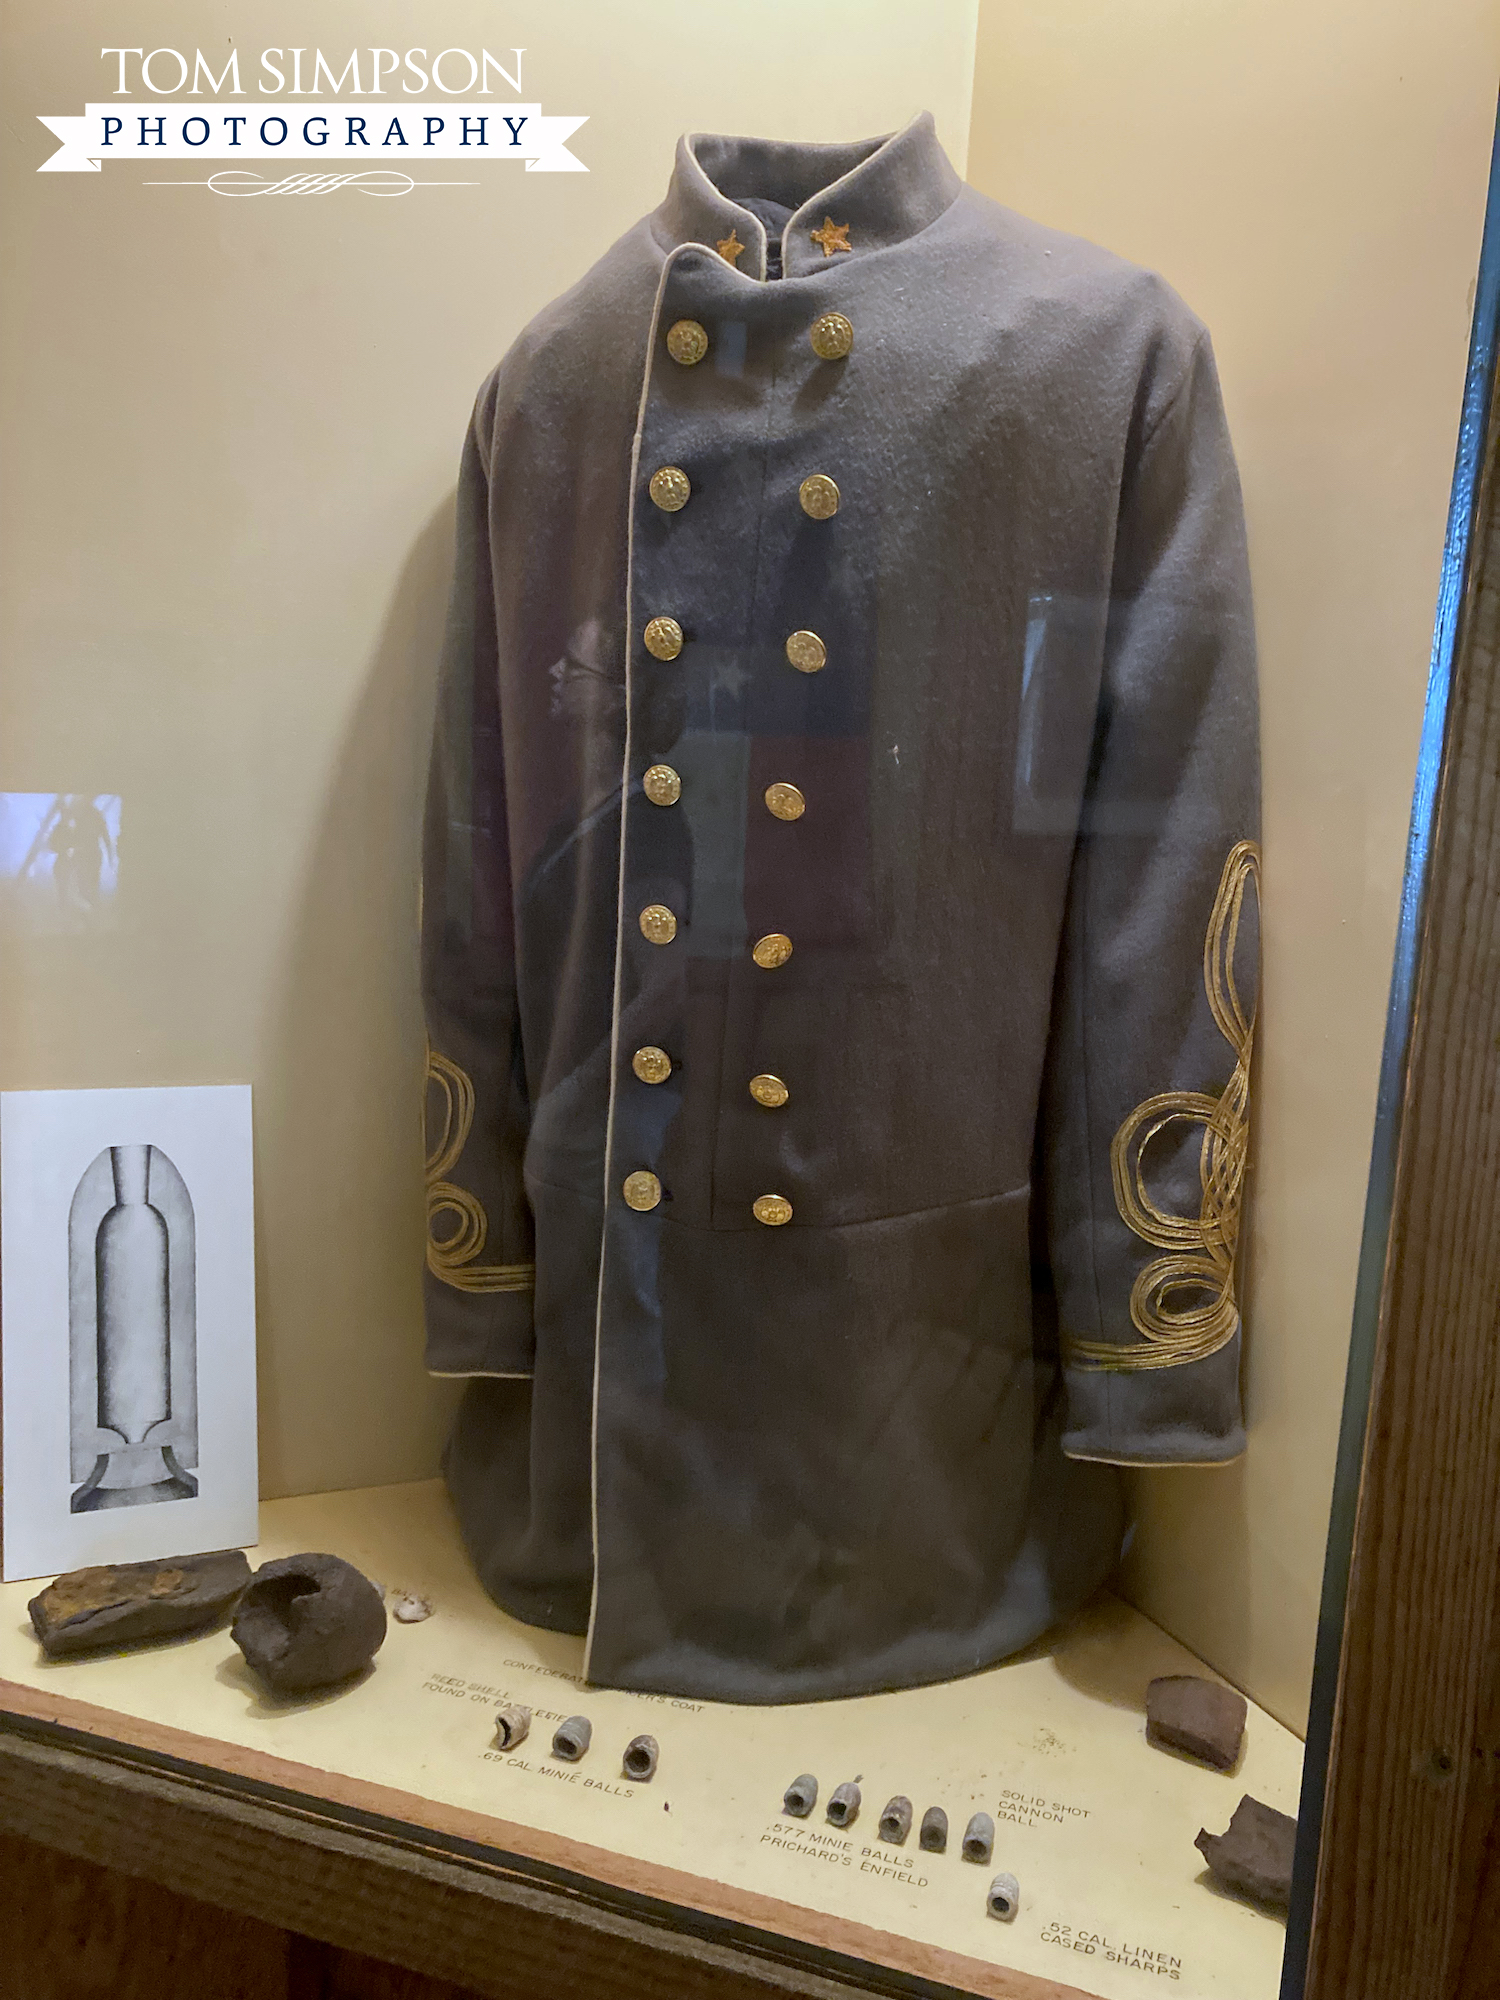 see a confederate officer's jacket when you stop at olustee